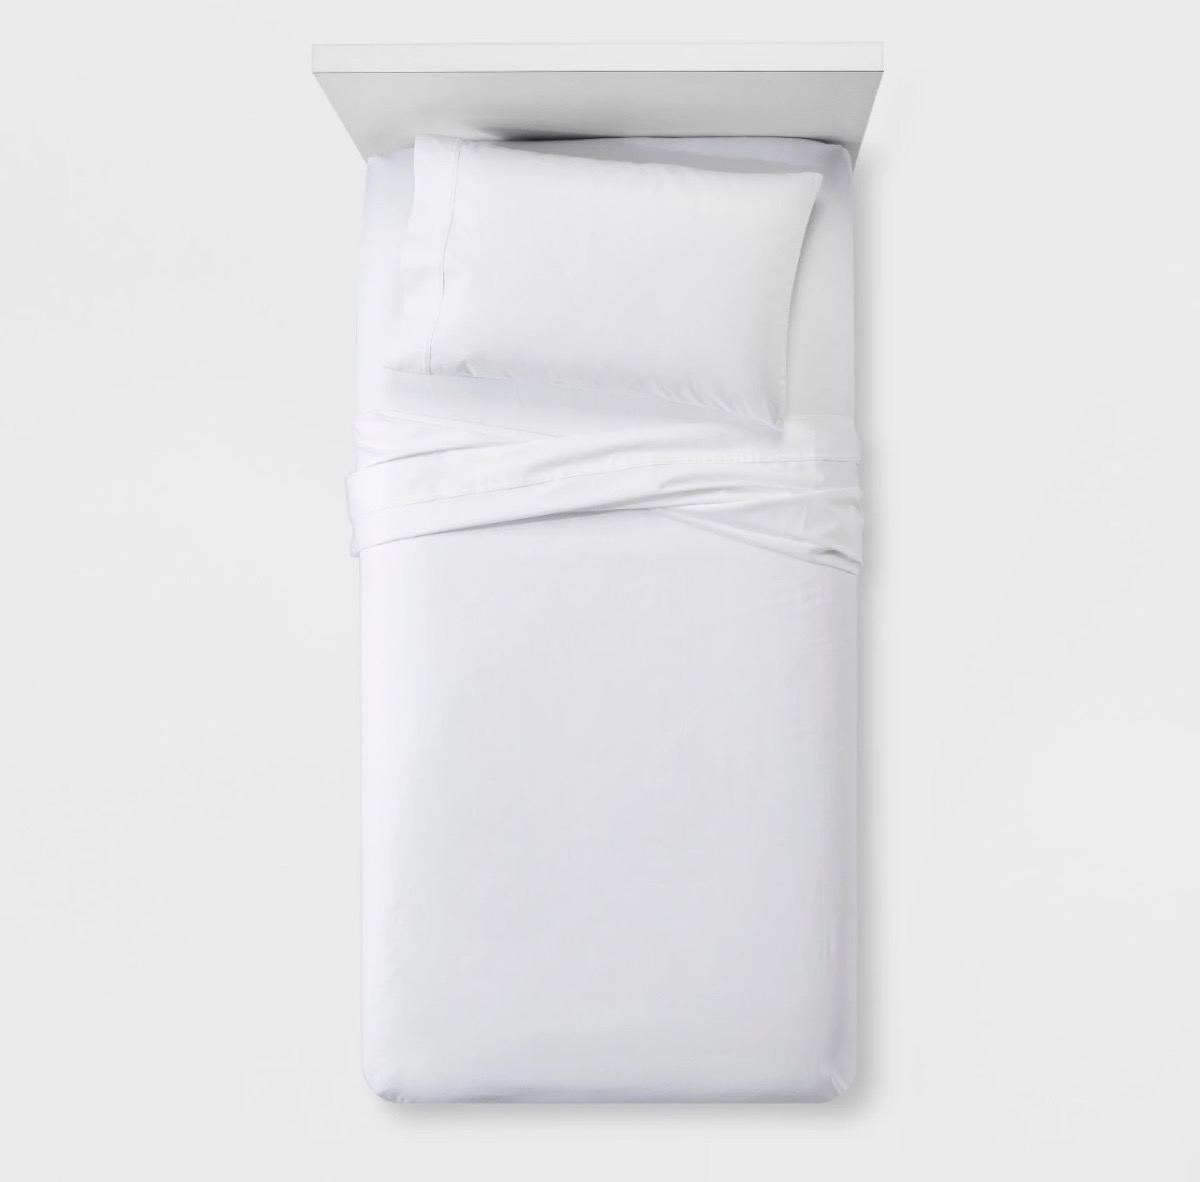 Sheets From Target {Save Money on Bed and Bath Items}